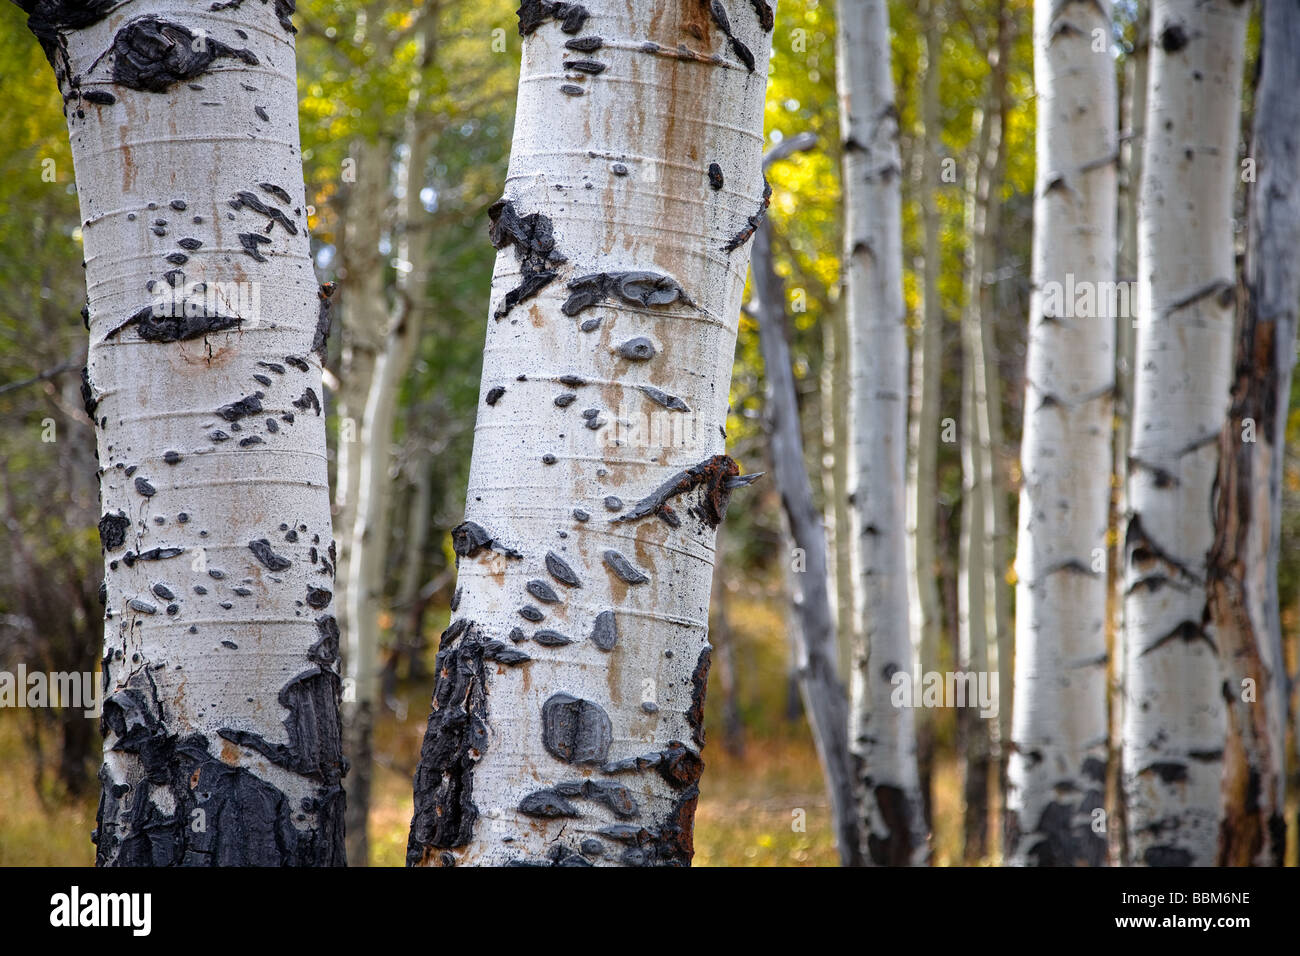 Close up of Aspen Tree Trunk automne Parc National de Yellowstone au Wyoming USA Banque D'Images